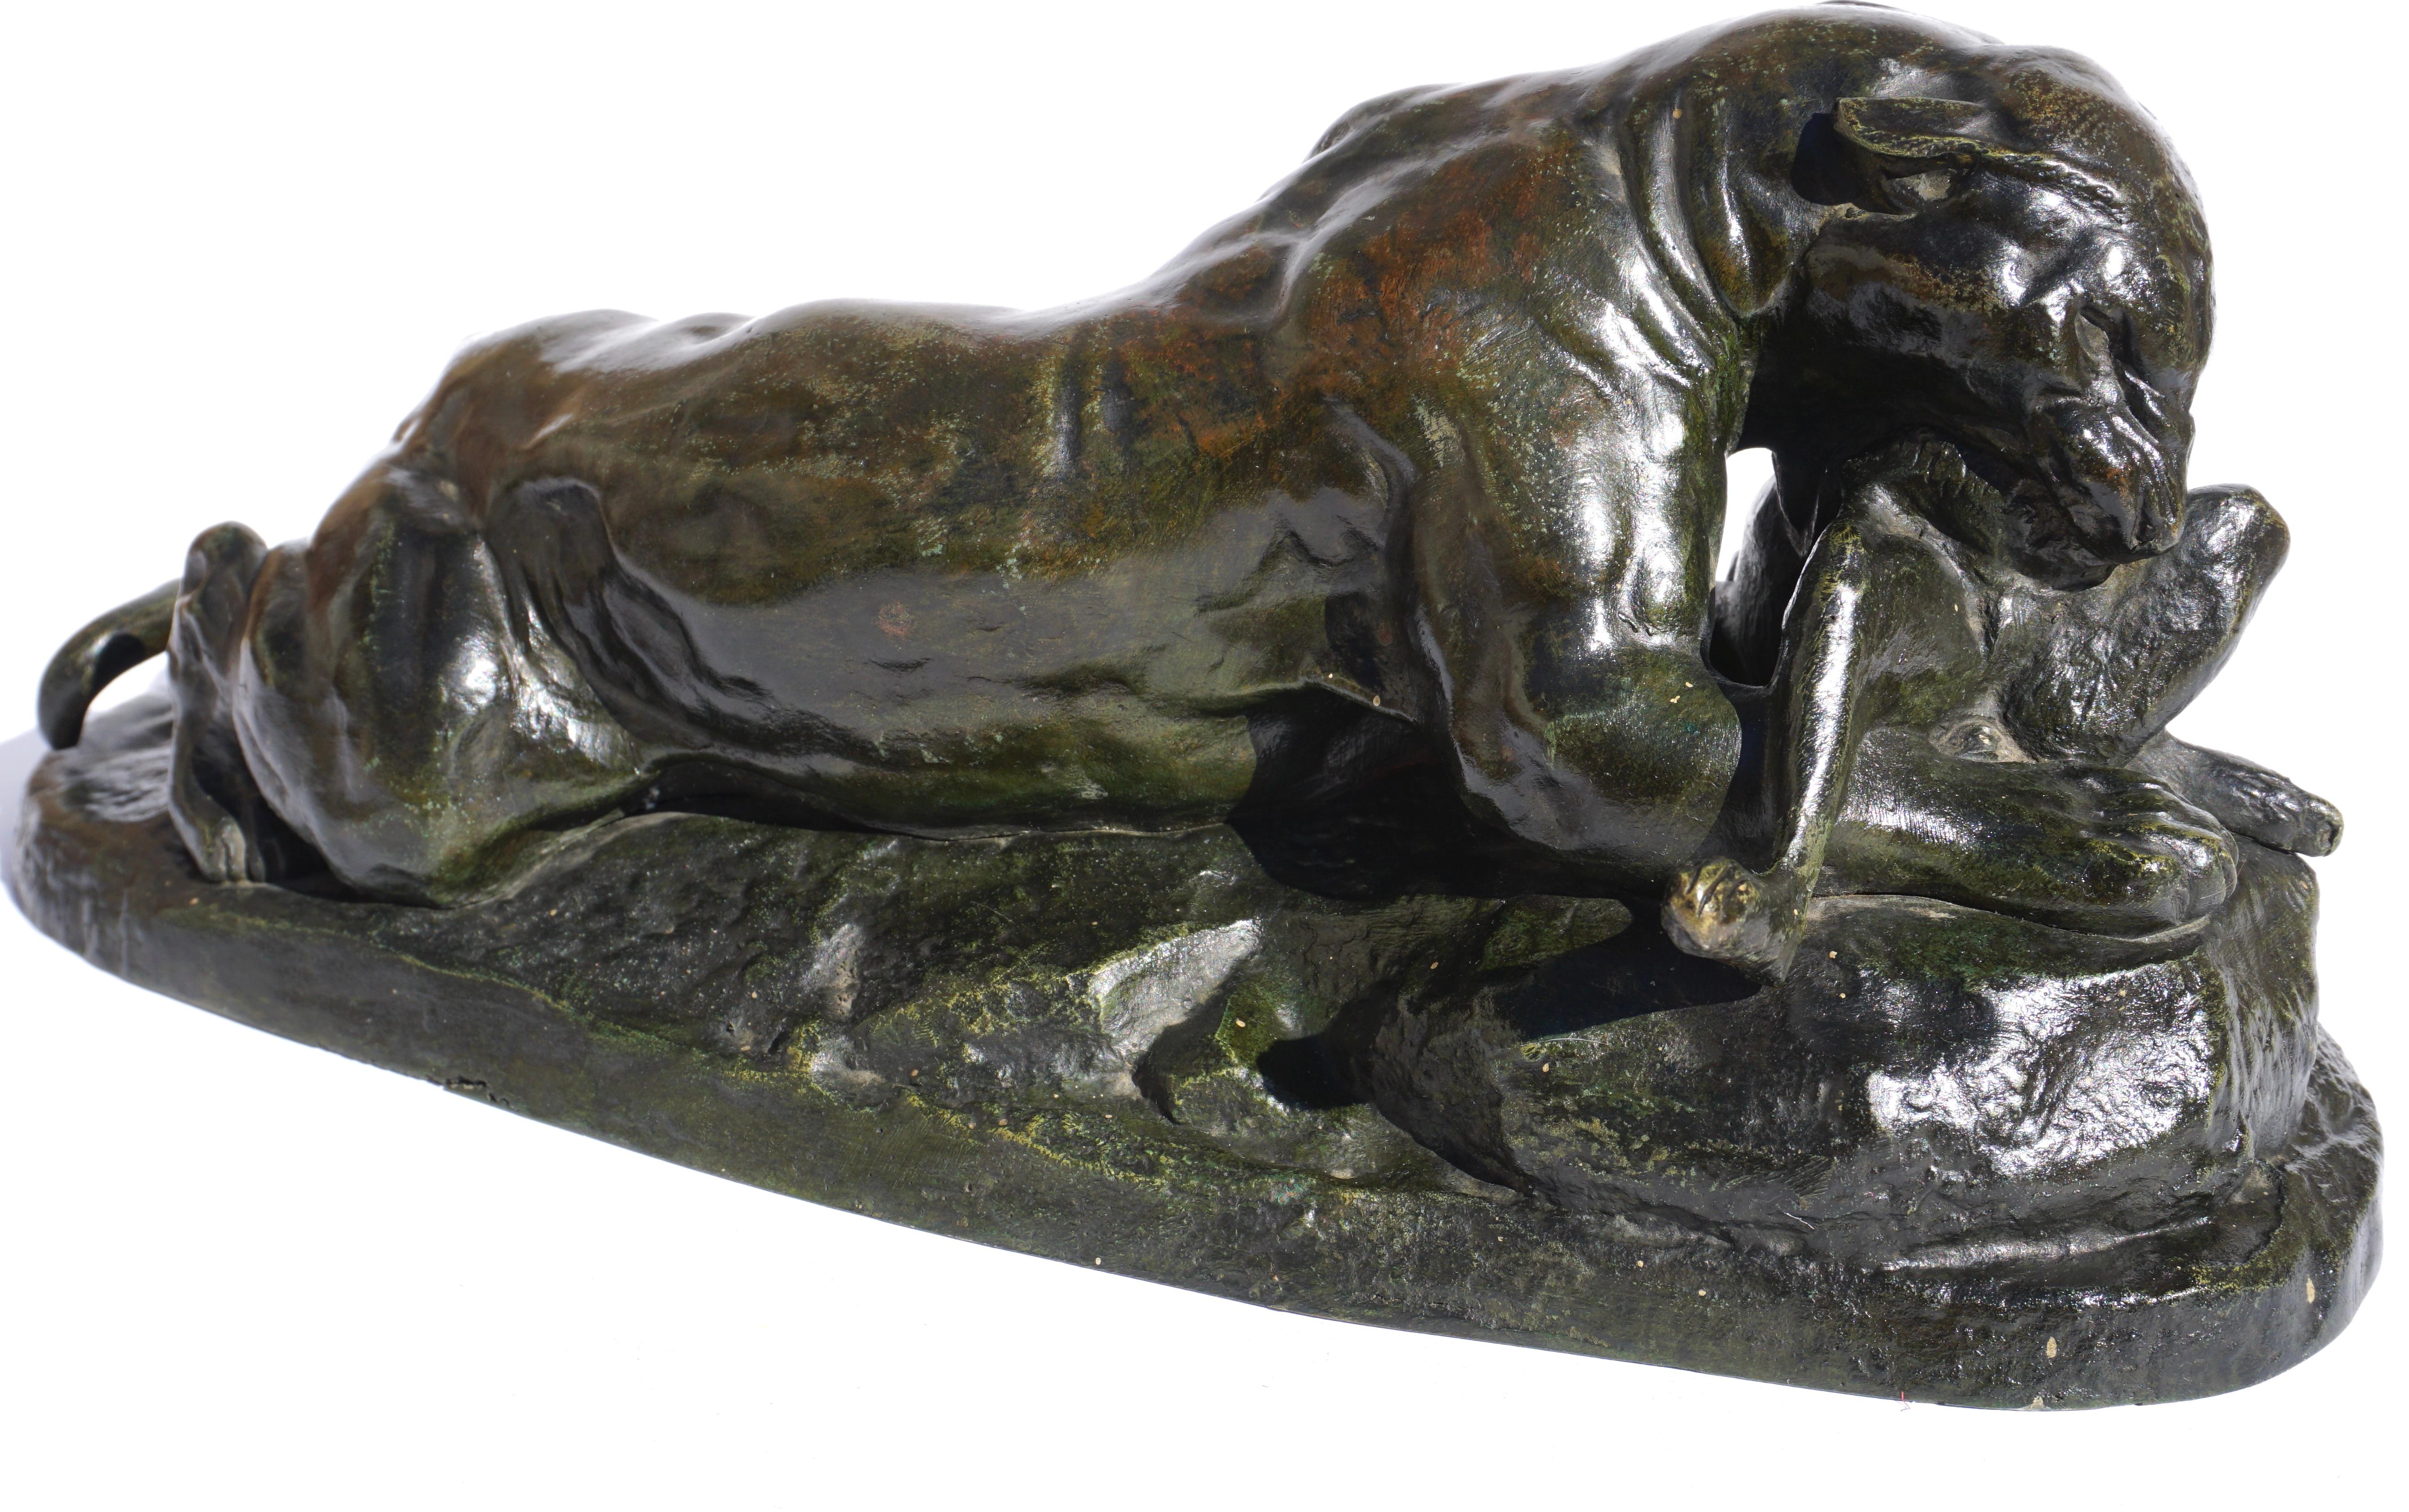 Antoine-Louis Barye (French, 1795-1875)
Jaguar dévorant un lièvre (Jaguar devouring a hare)
signed BARYE
bronze, dark-Green-brown patina
Measures: Height 5.5 inches, width 13.6 inches, depth 5.7 inches
Modeled, 1850

A wonderful early bronze